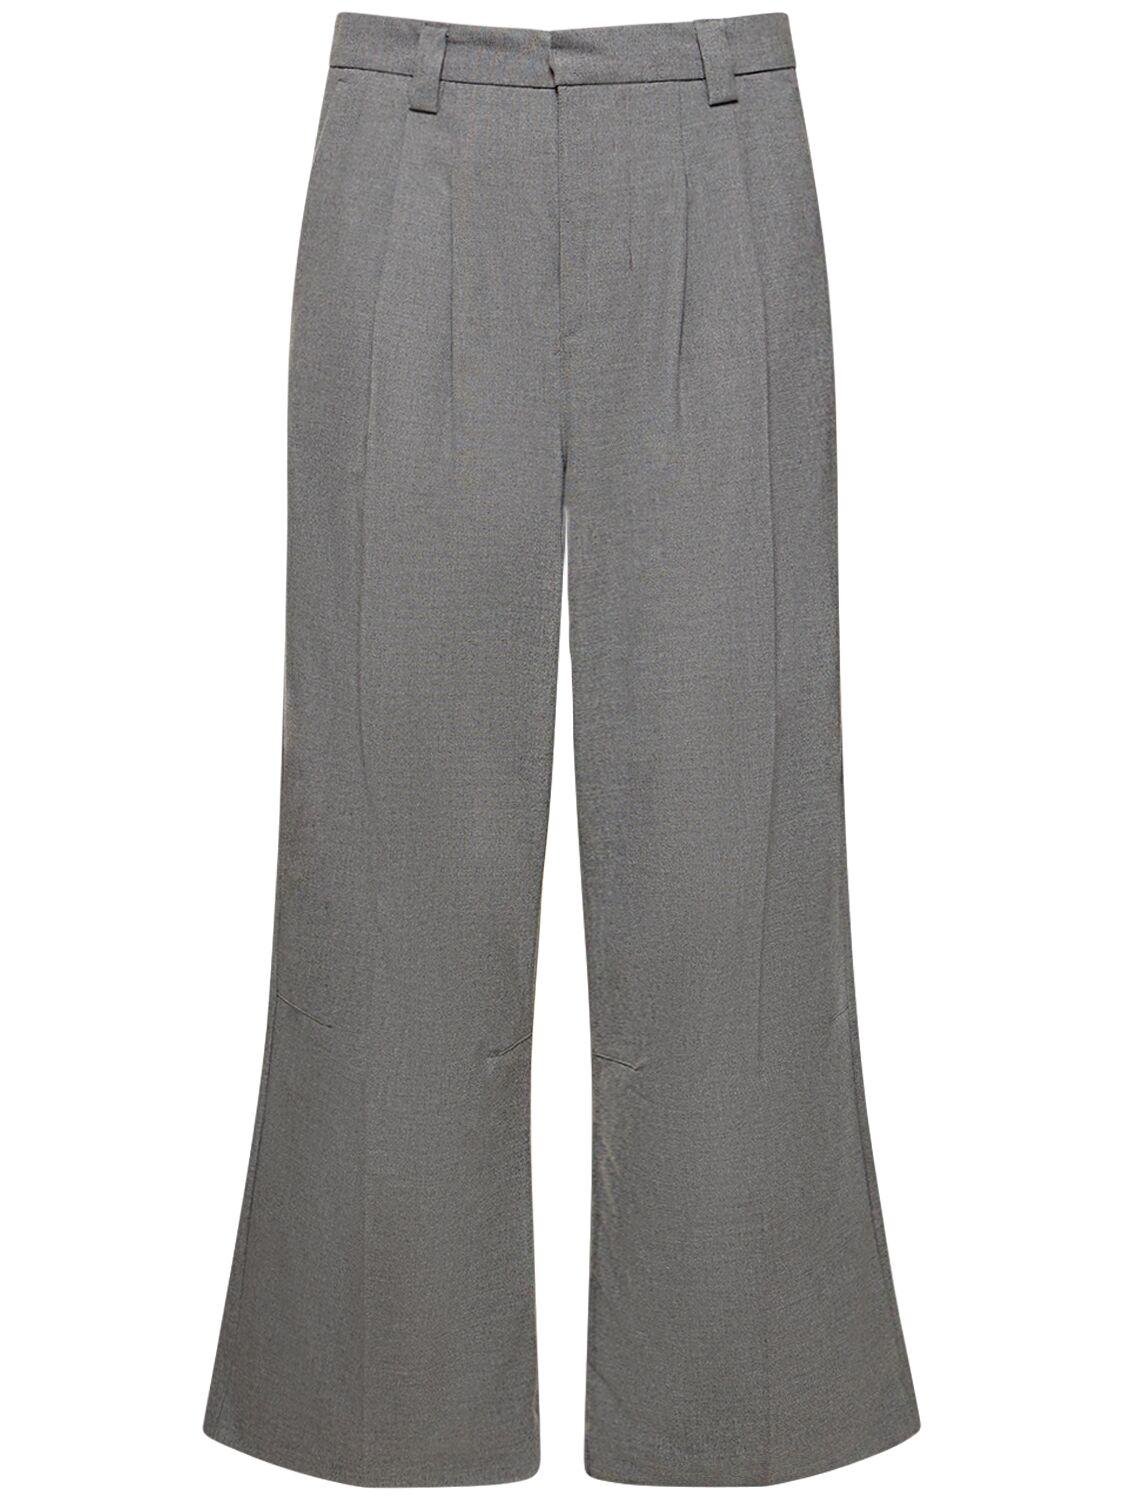 Goliath Grey Suit Pants by JADED LONDON